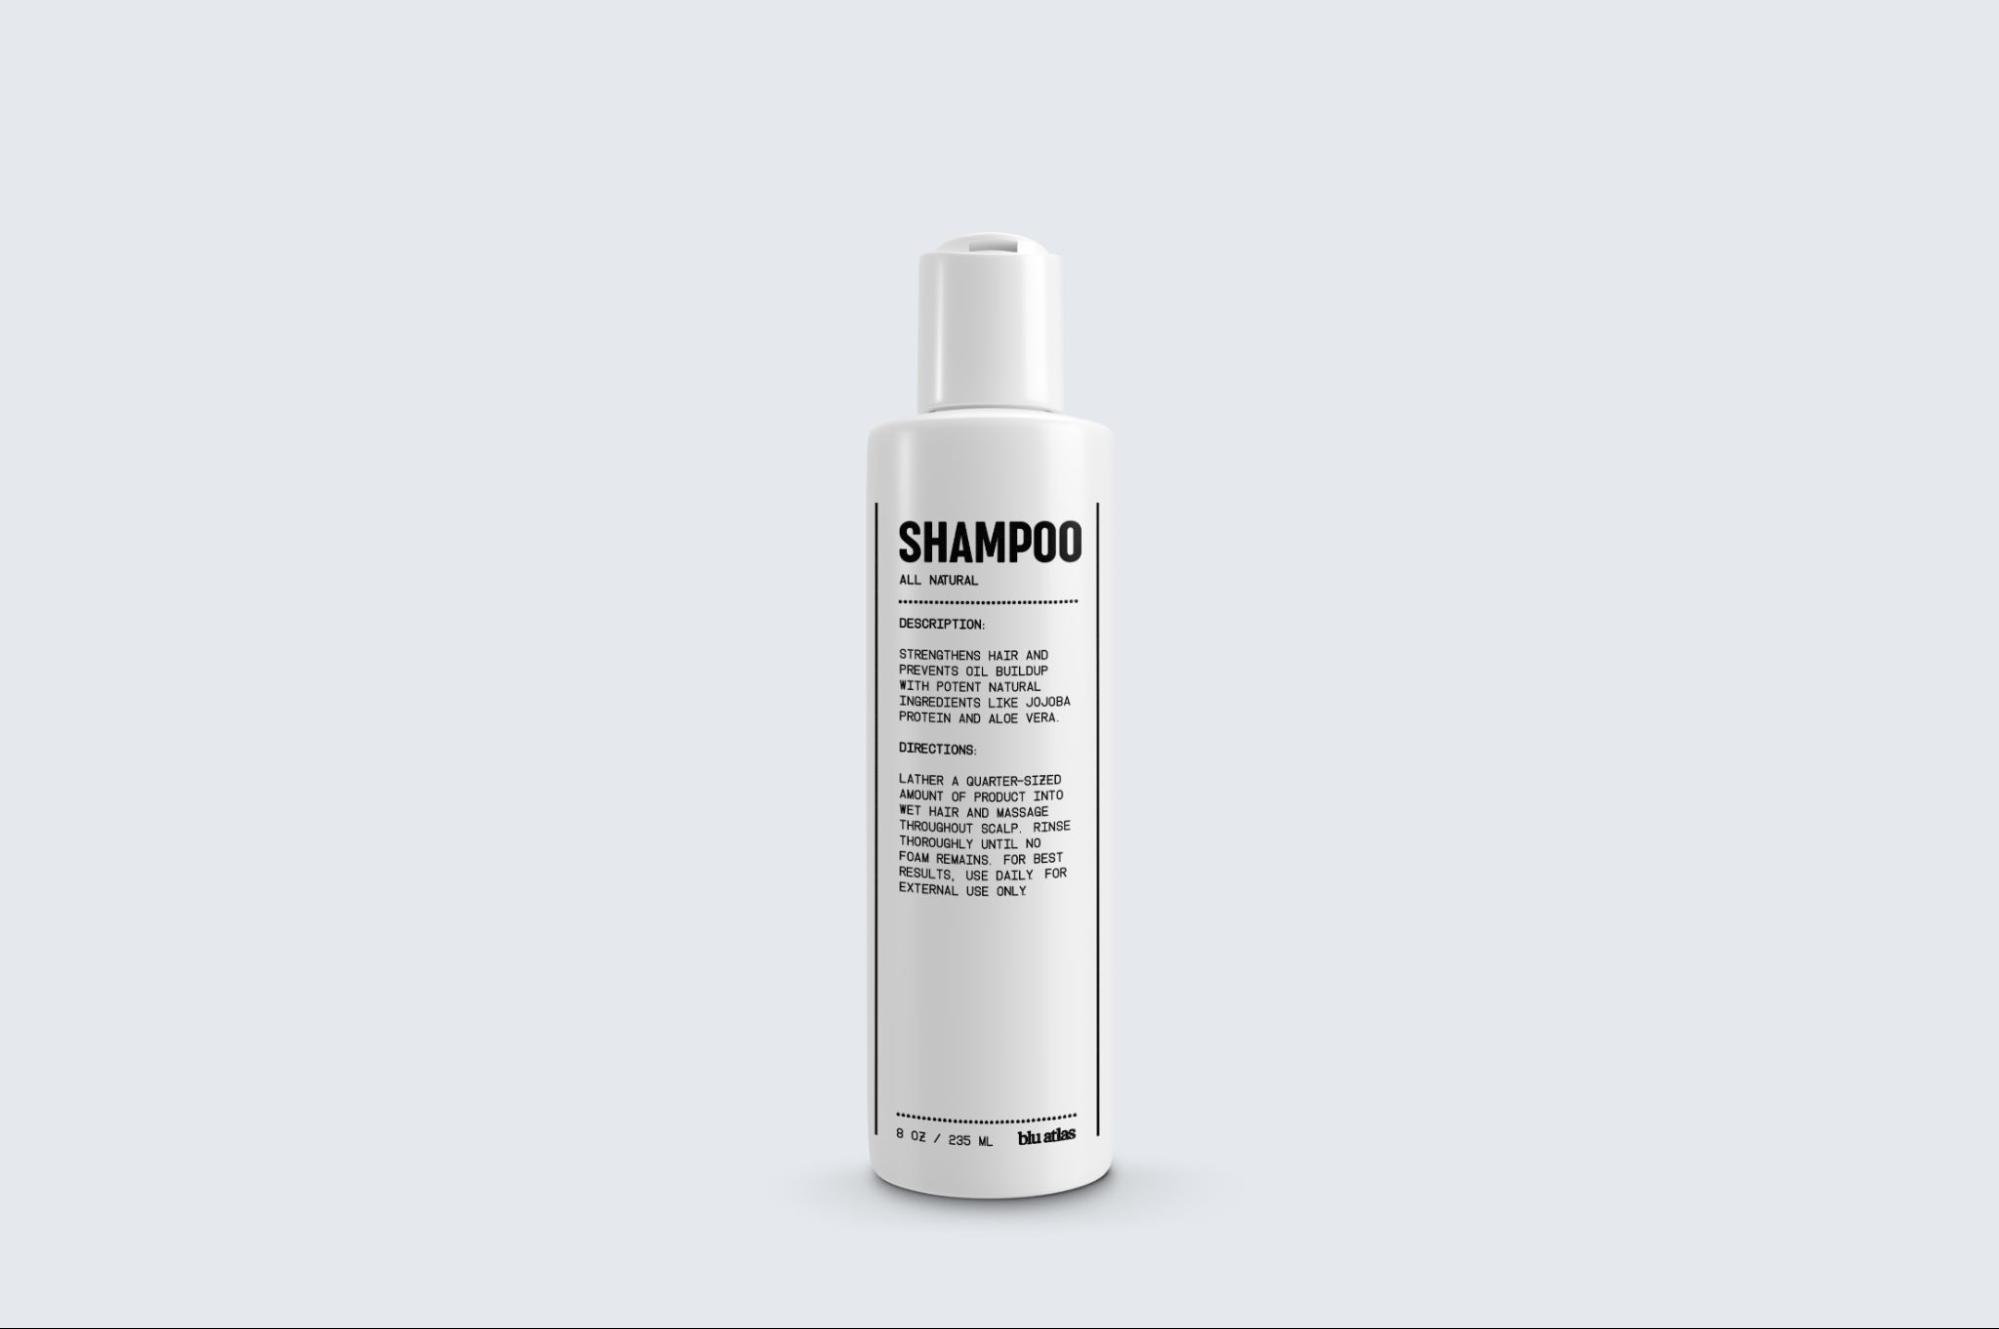 Blu Atlas Shampoo Review: Does It Really Work for Hair Loss? - wide 4